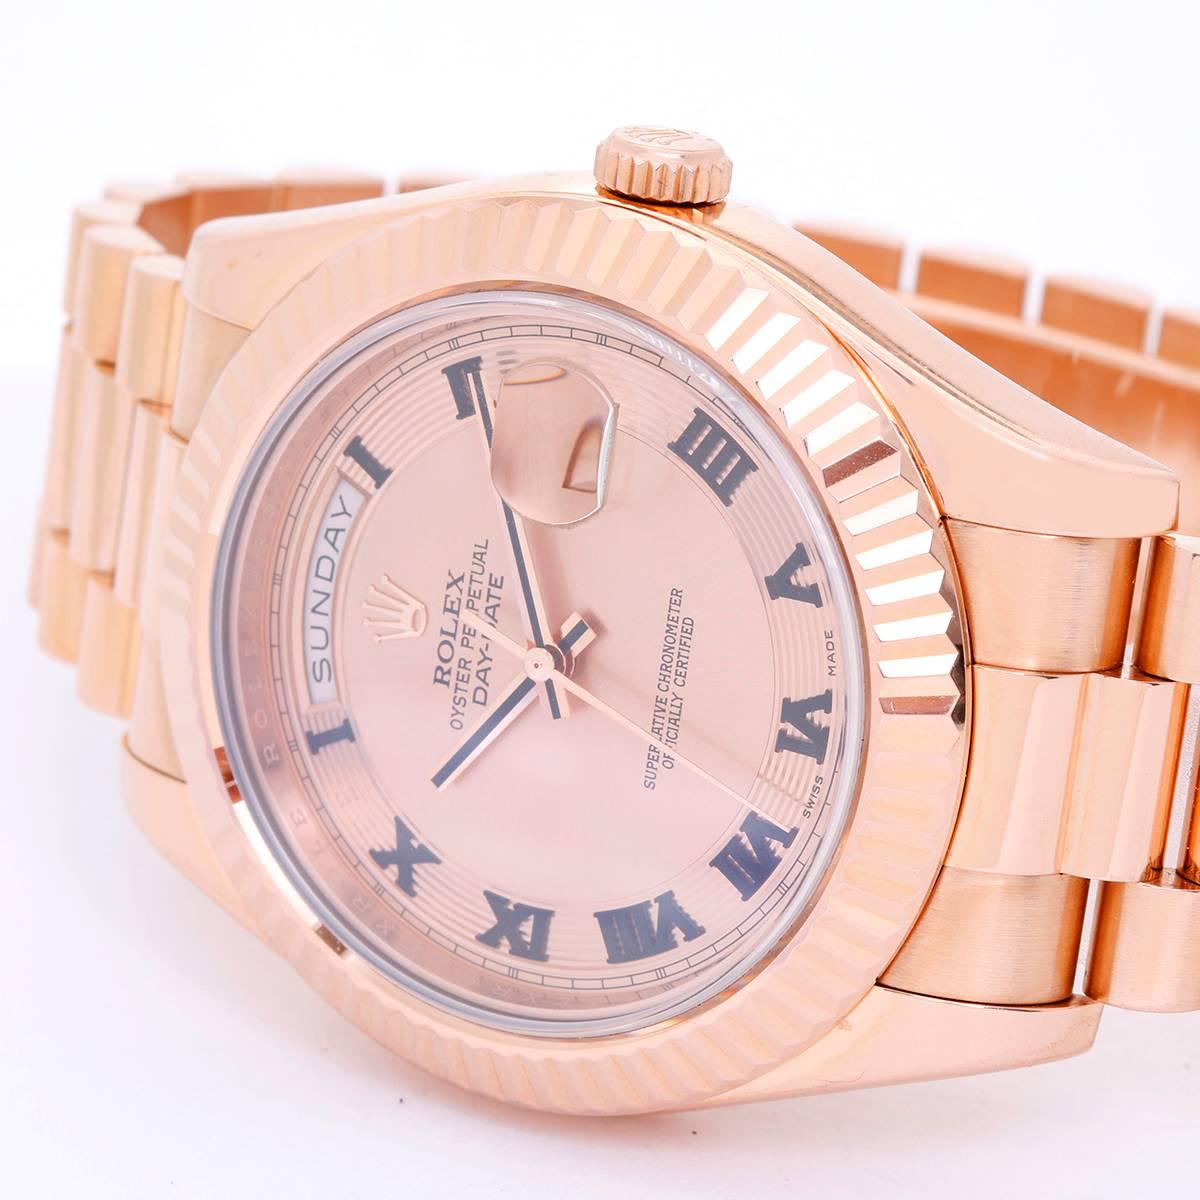 Rolex Day-Date II 41mm 18k Rose Gold Men's President Watch 218235 -  Automatic winding, 31 jewels, sapphire crystal, with day and date. 18k rose gold case with fluted bezel (41mm diameter). Pink concentric dial with black Roman numerals. 18k rose